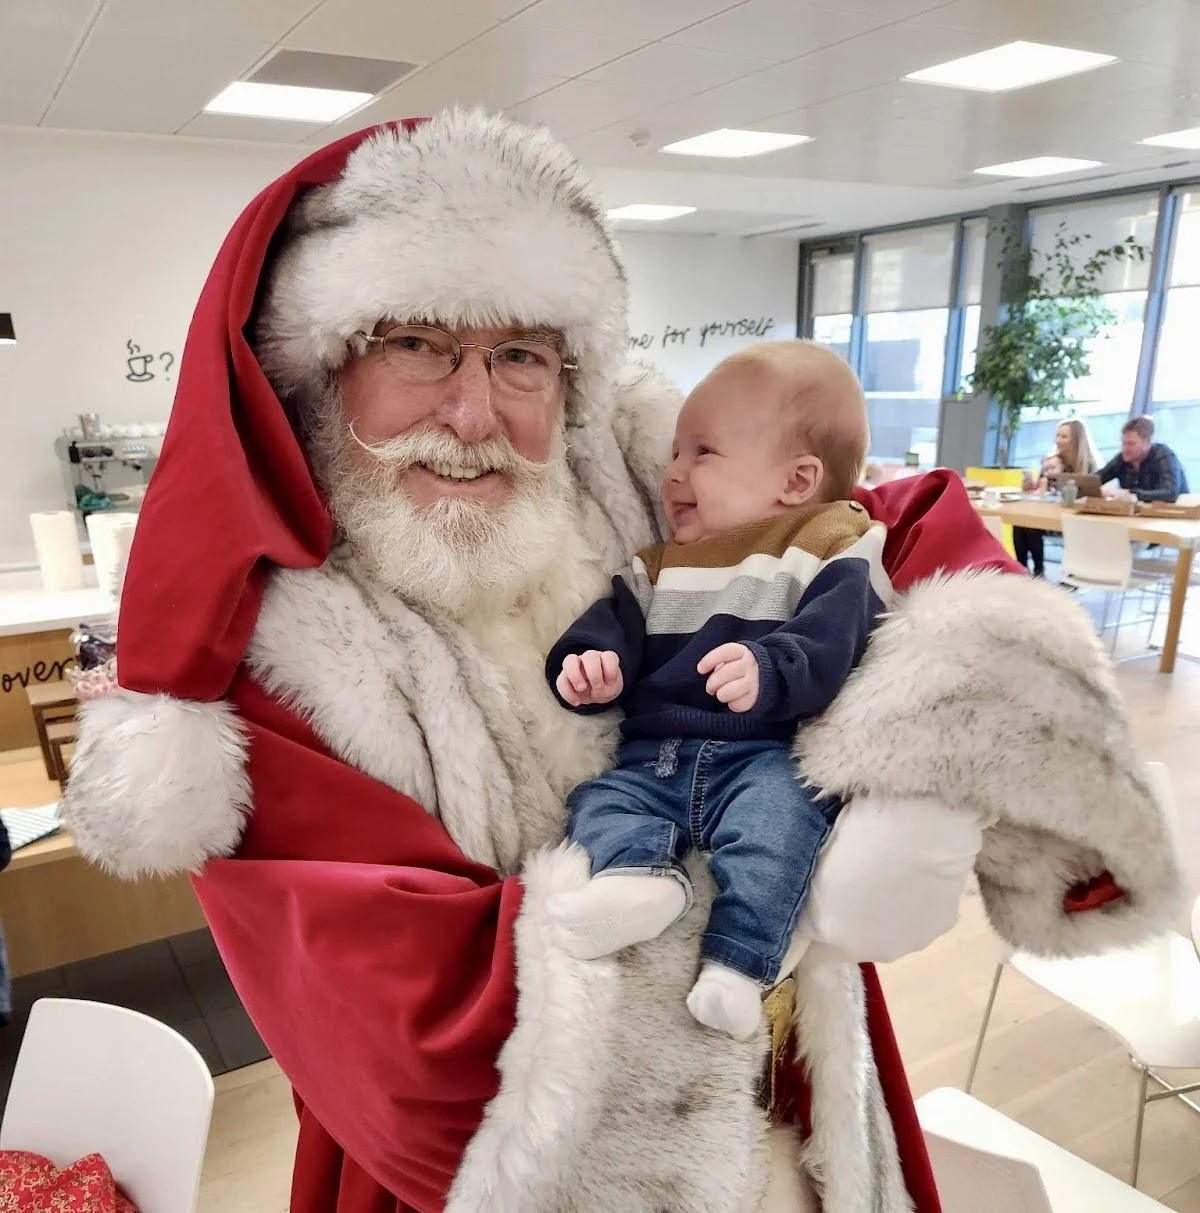 John Conneely's baby with santa at holiday party